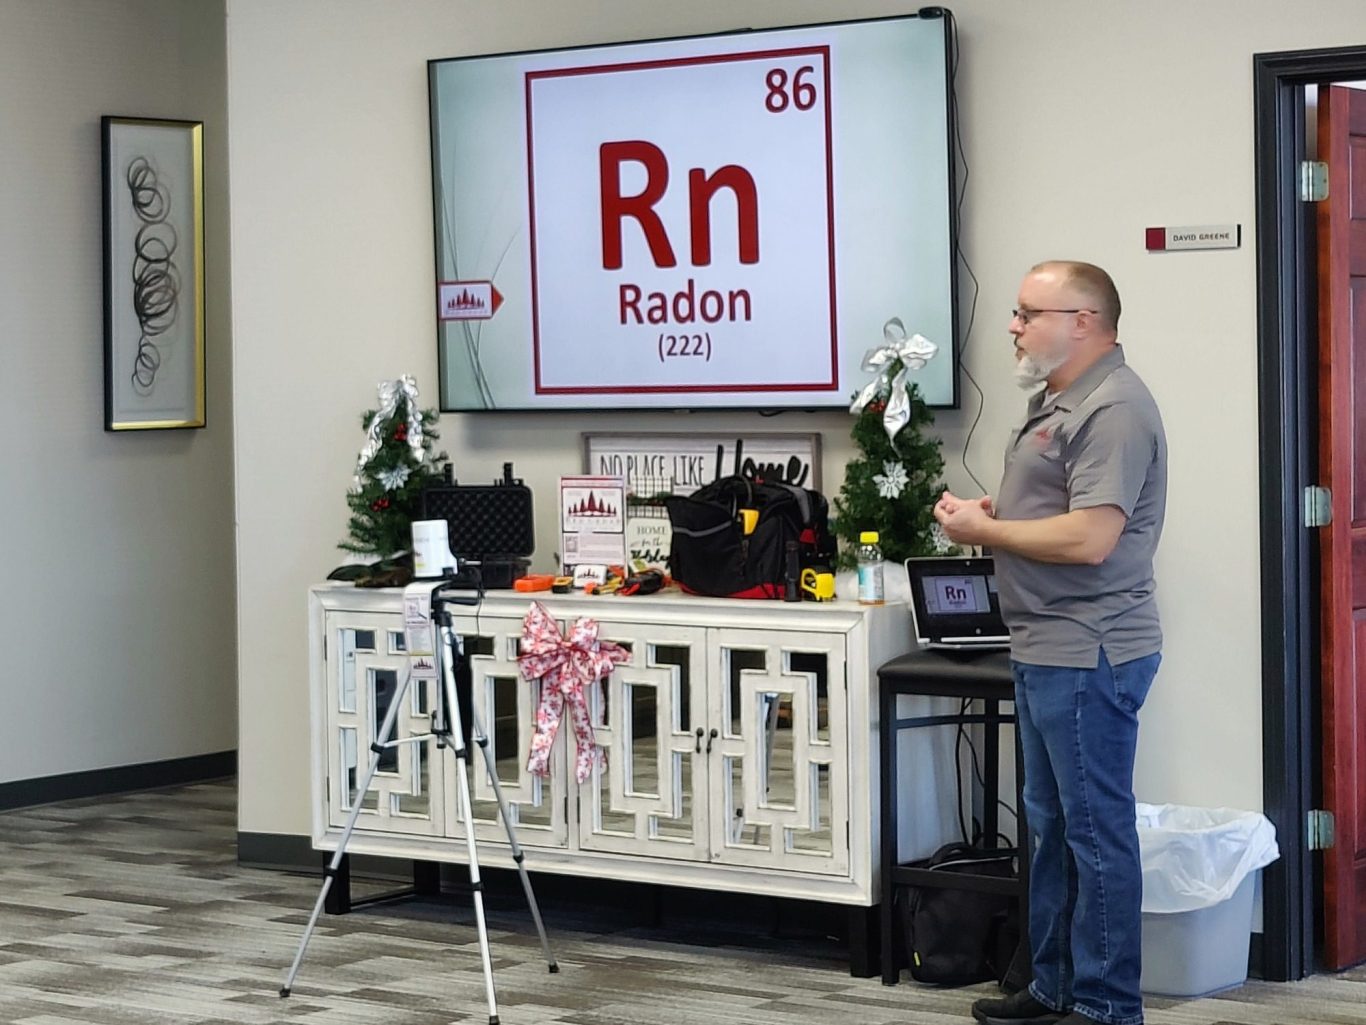 Blain King, InterNACHI Certified Professional Inspector with Red Cedar Professional Inspections teaches a class on Radon Risks, Testing, and Mitigation to Realtors in Clarksville, TN.